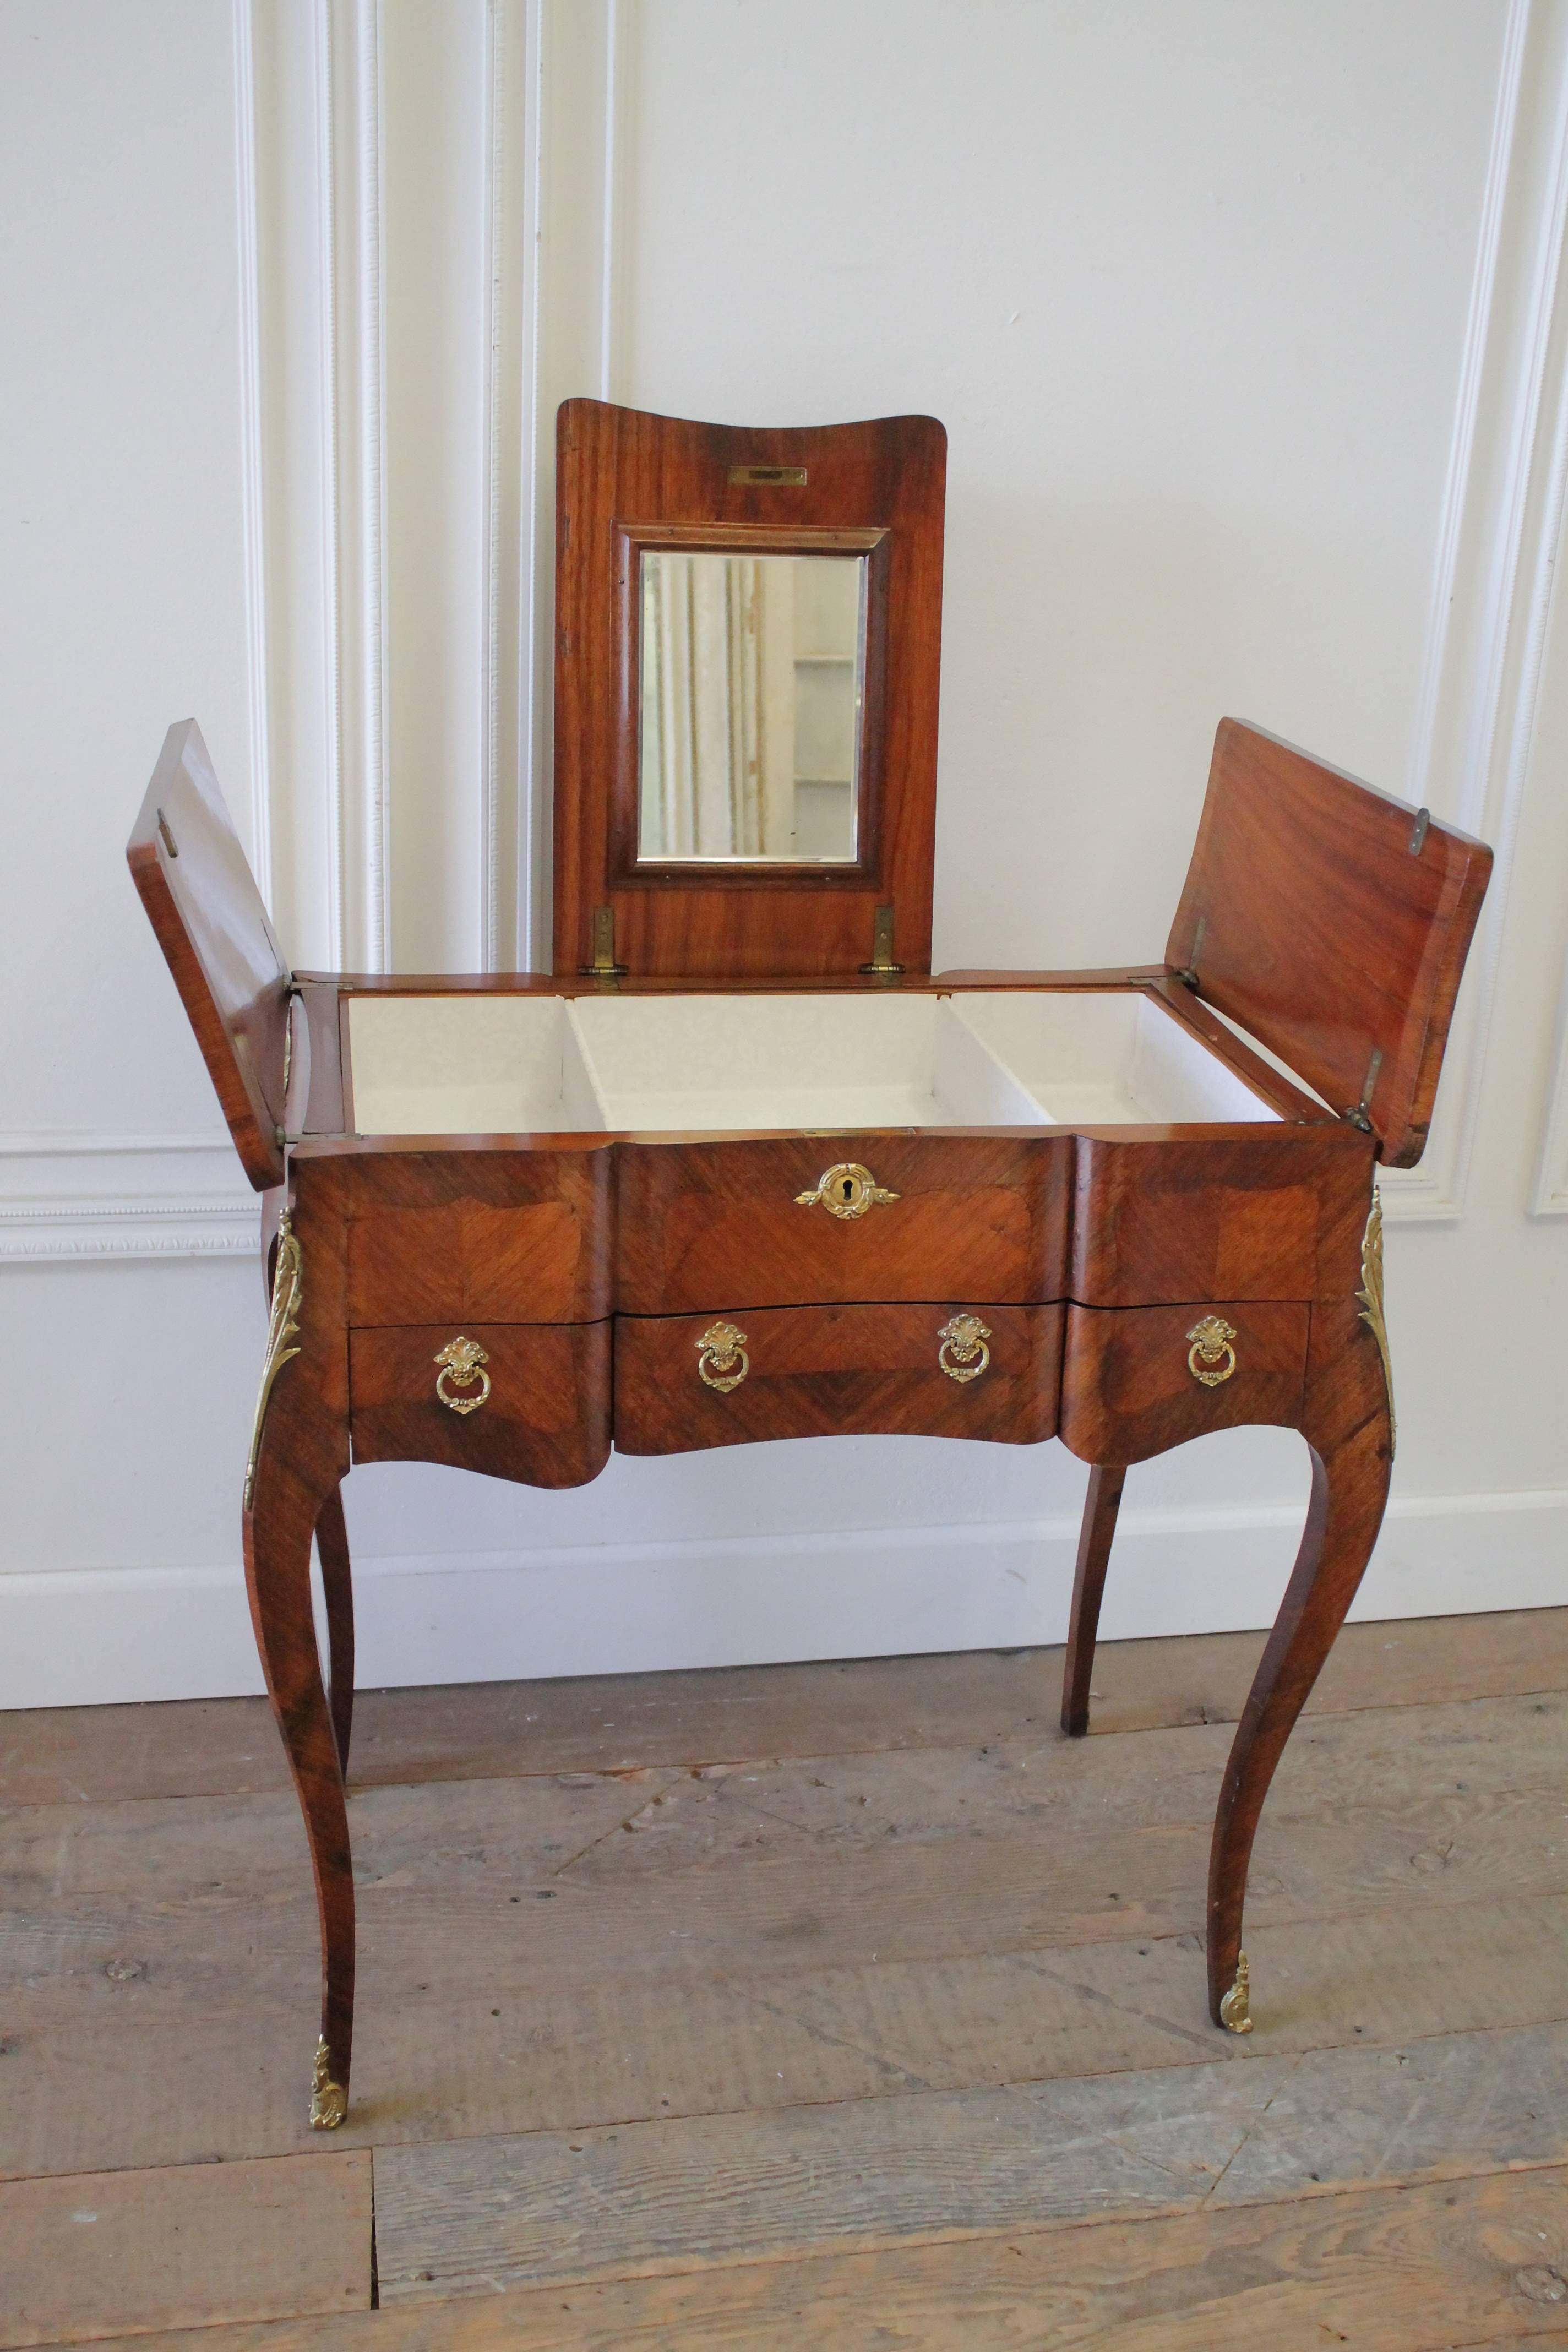 Early 20th century Italian inlaid vanity with original mirror and gilt bronze mounts and ring pulls. Drawers are finished with a dovetail, and has a white lining that can be removed easily. The vanity top centre opens by lifting straight up, then